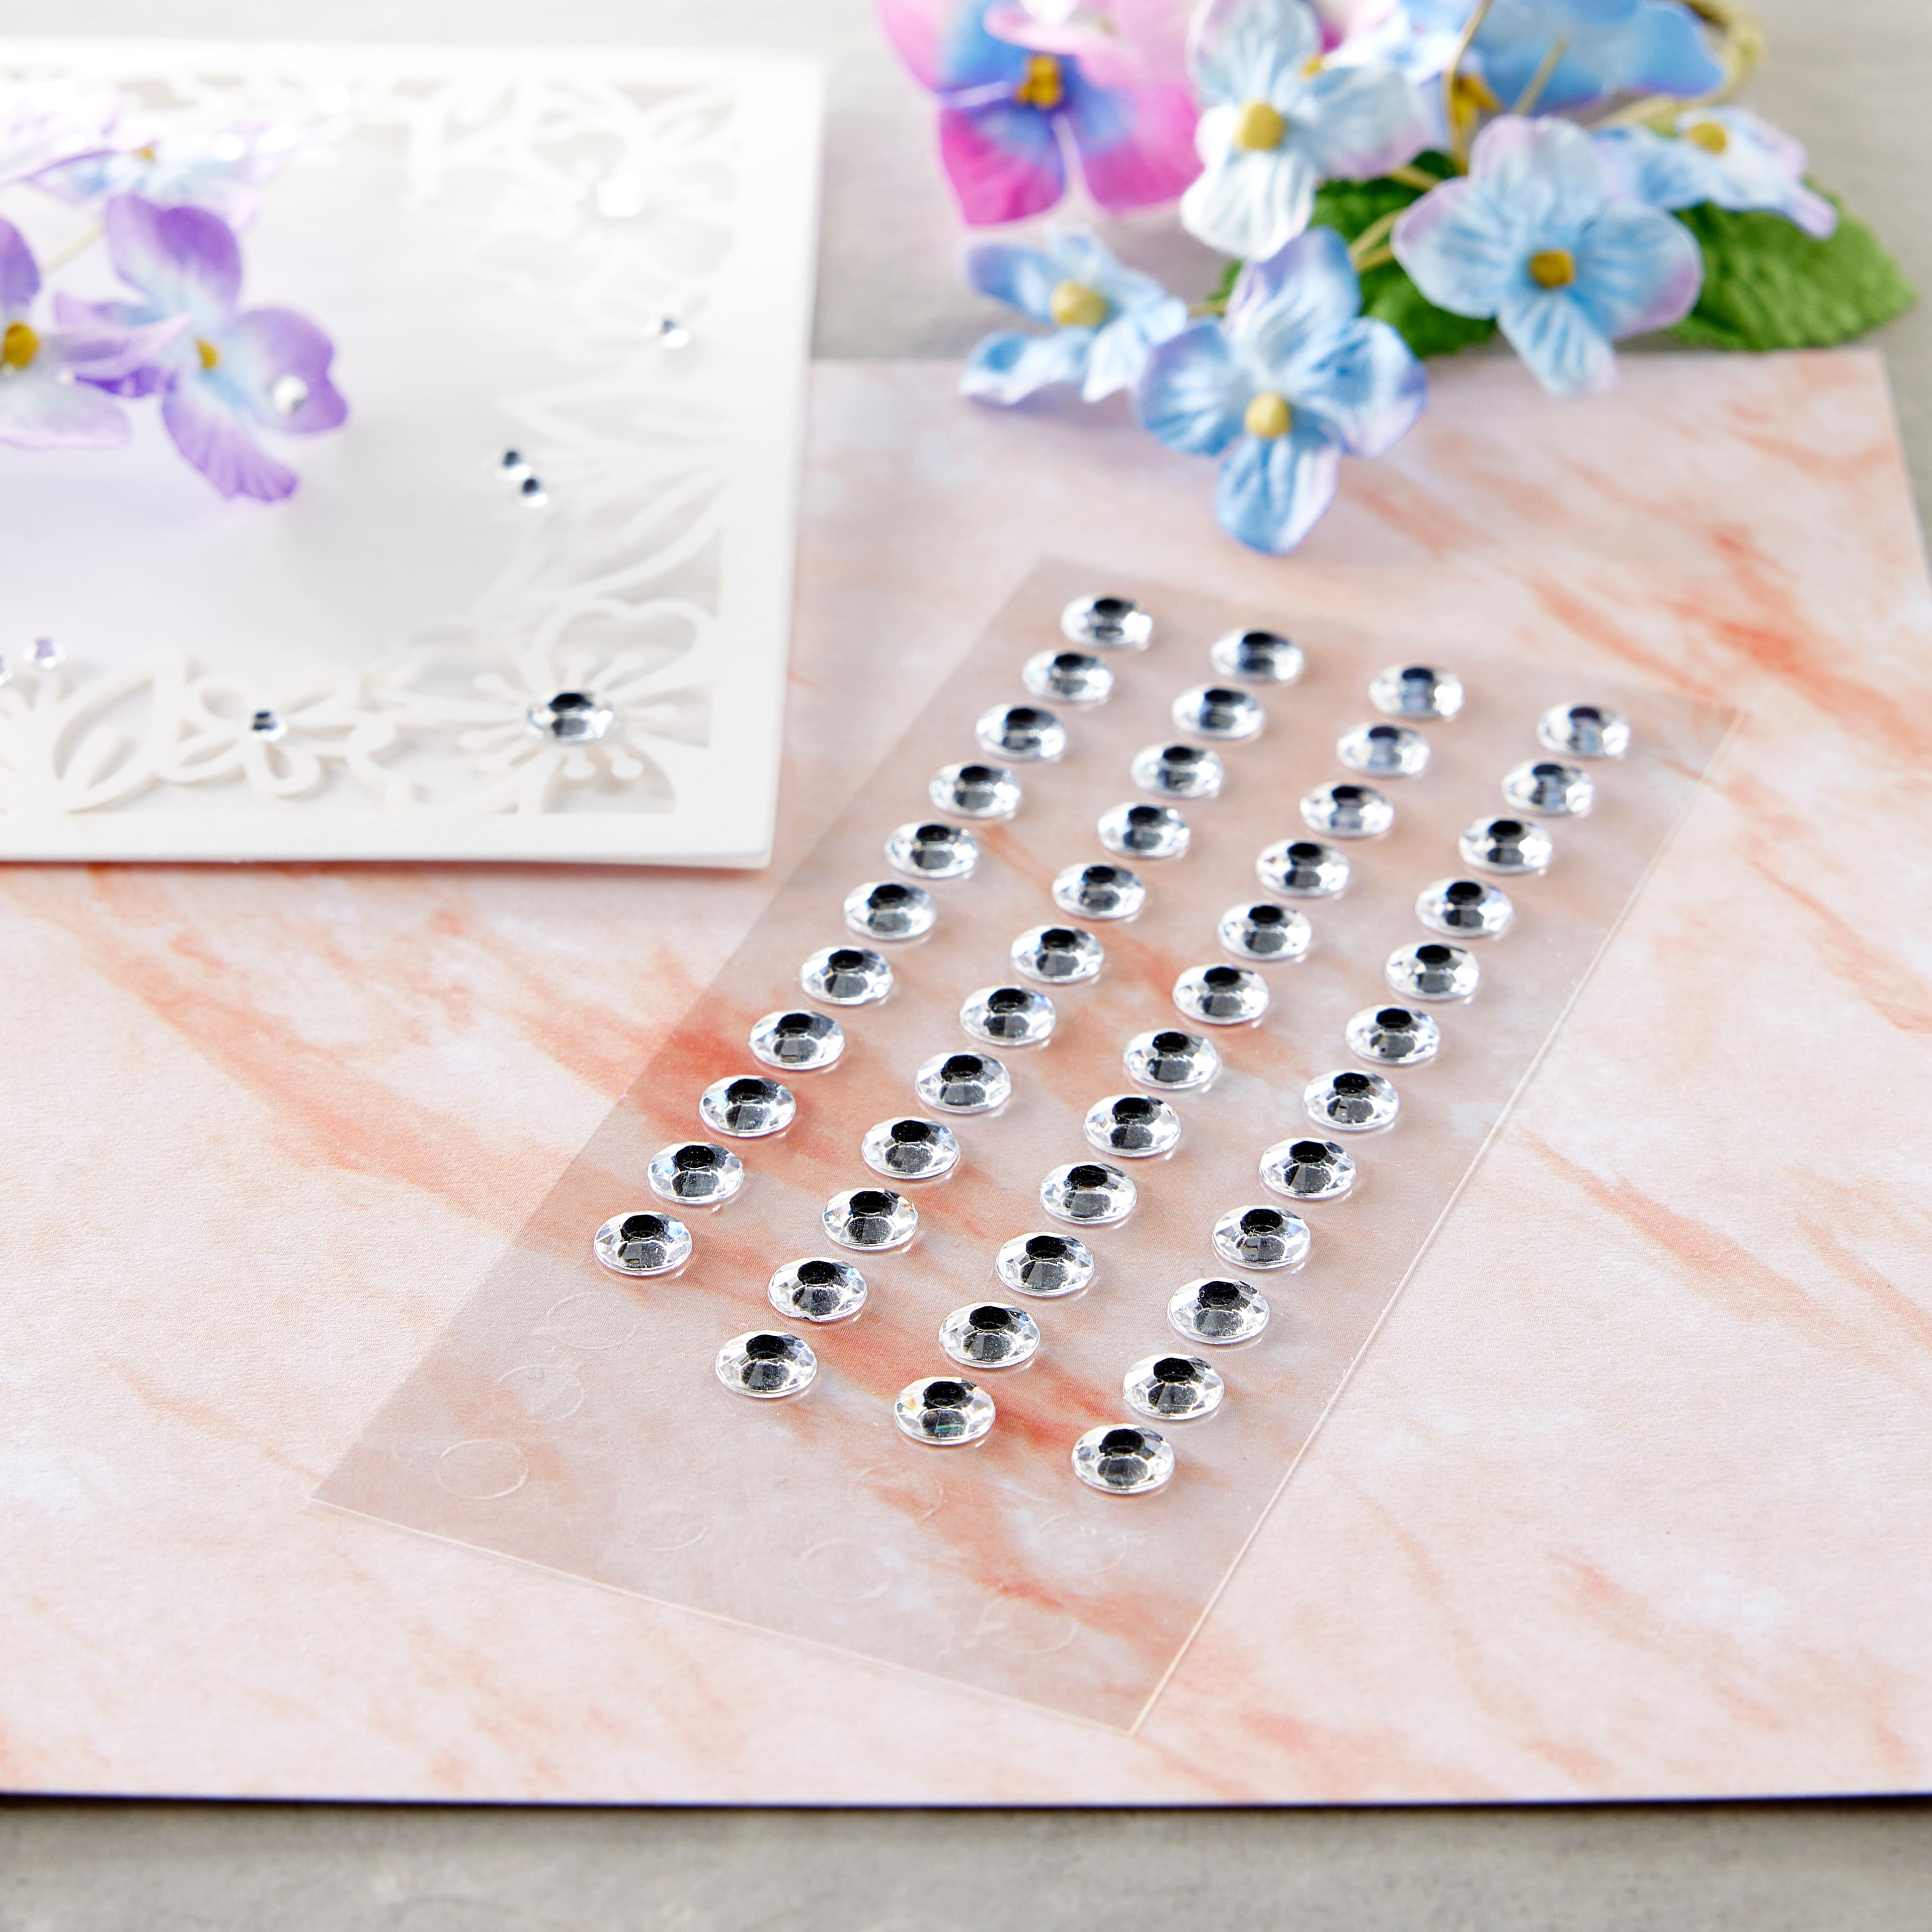 3mm Clear Adhesive Rhinestones by Recollections&#x2122;